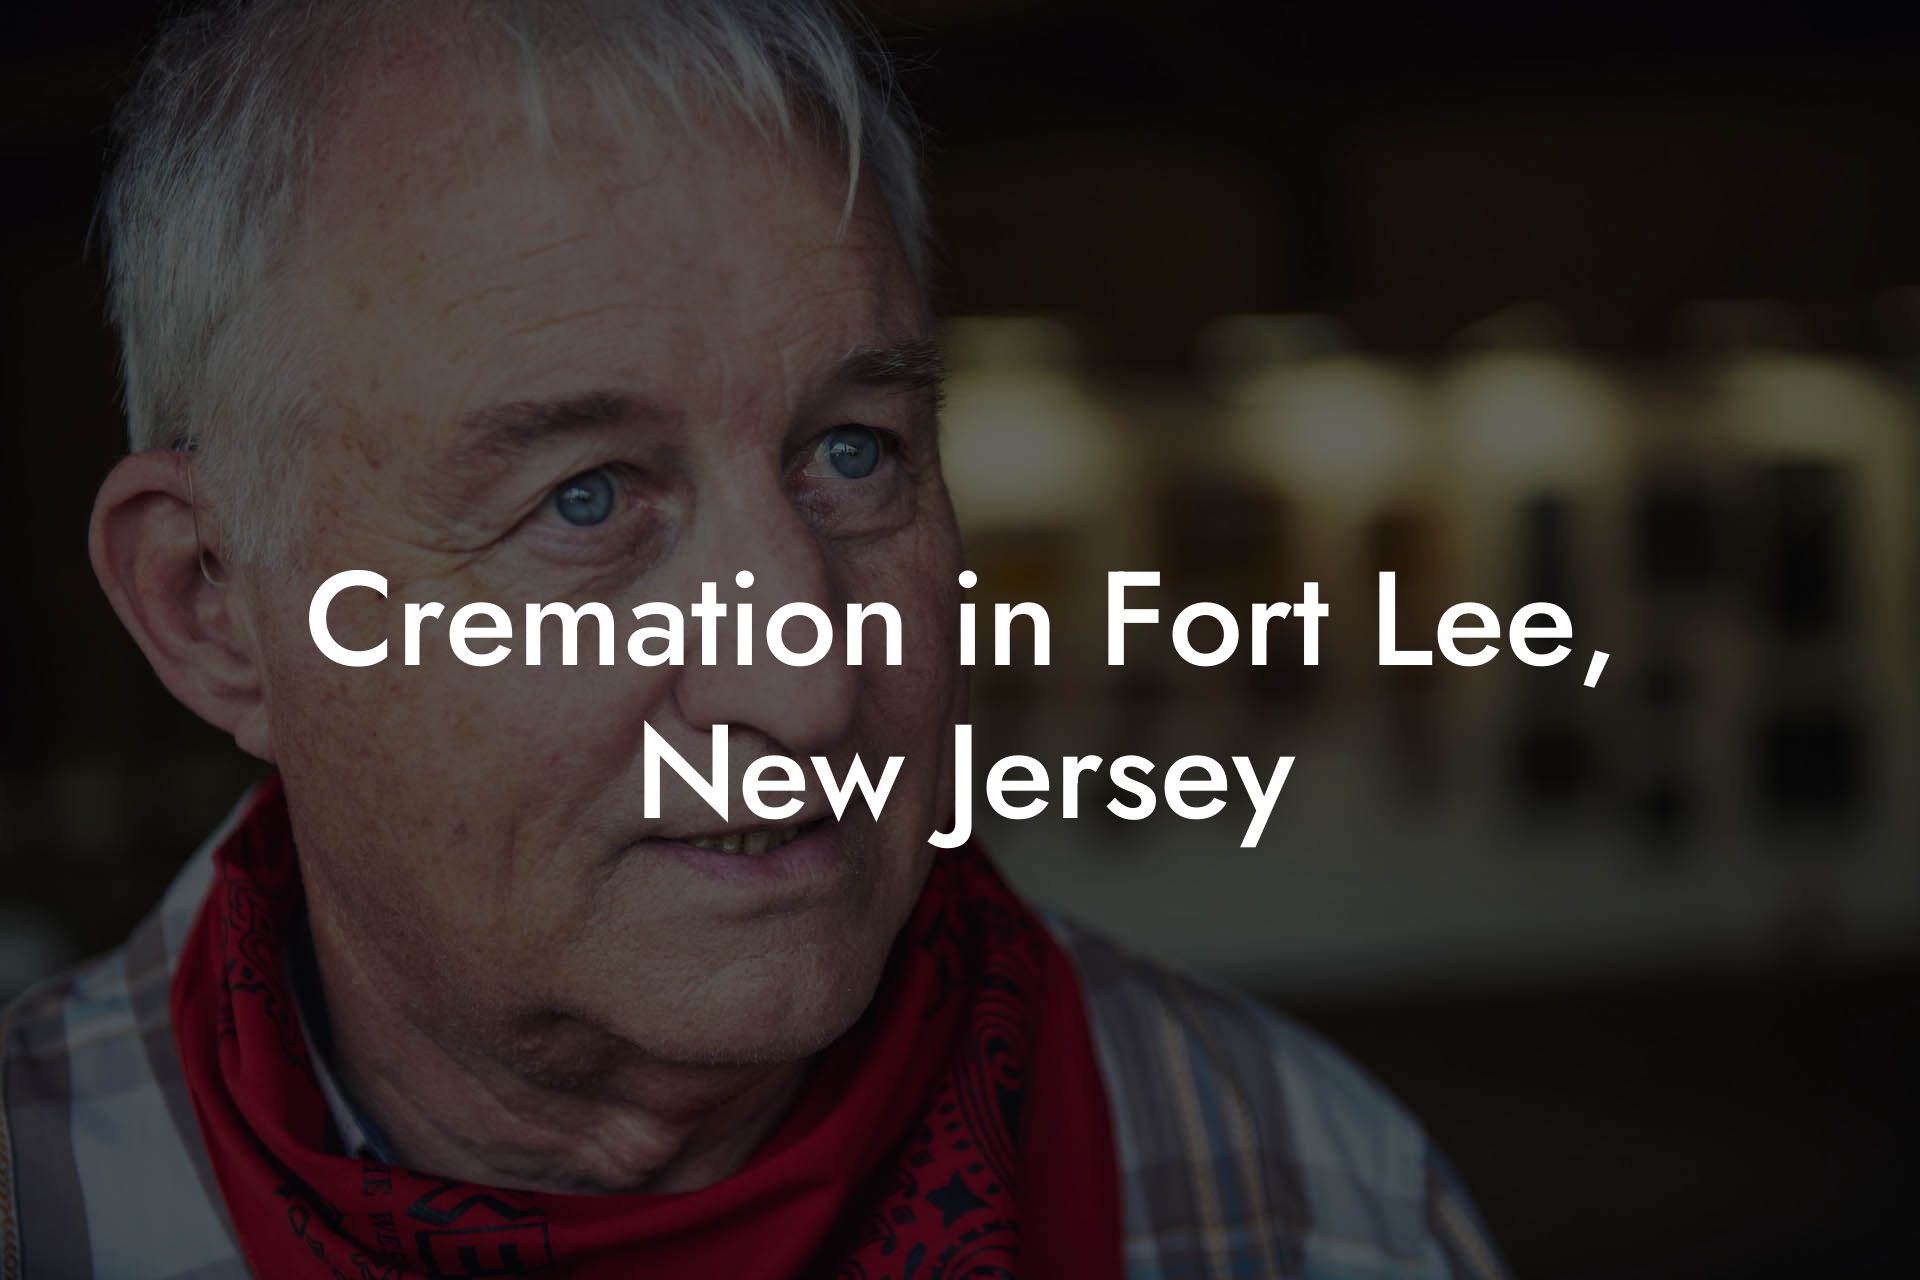 Cremation in Fort Lee, New Jersey